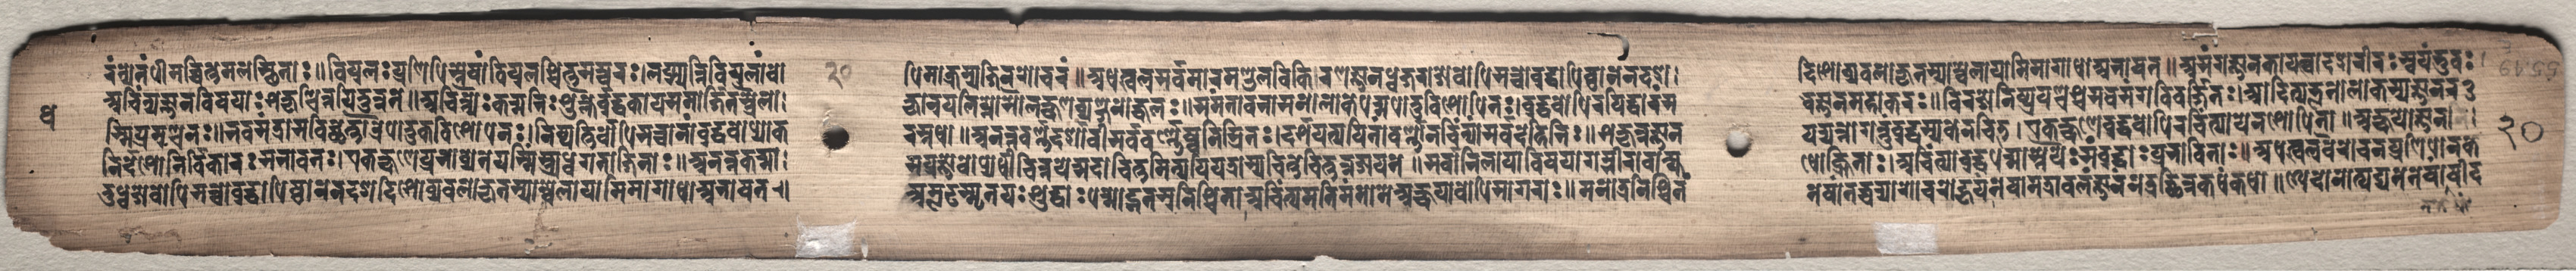 Text, folio 20 (verso) from a Gandavyuha-sutra (Scripture of the Supreme Array)